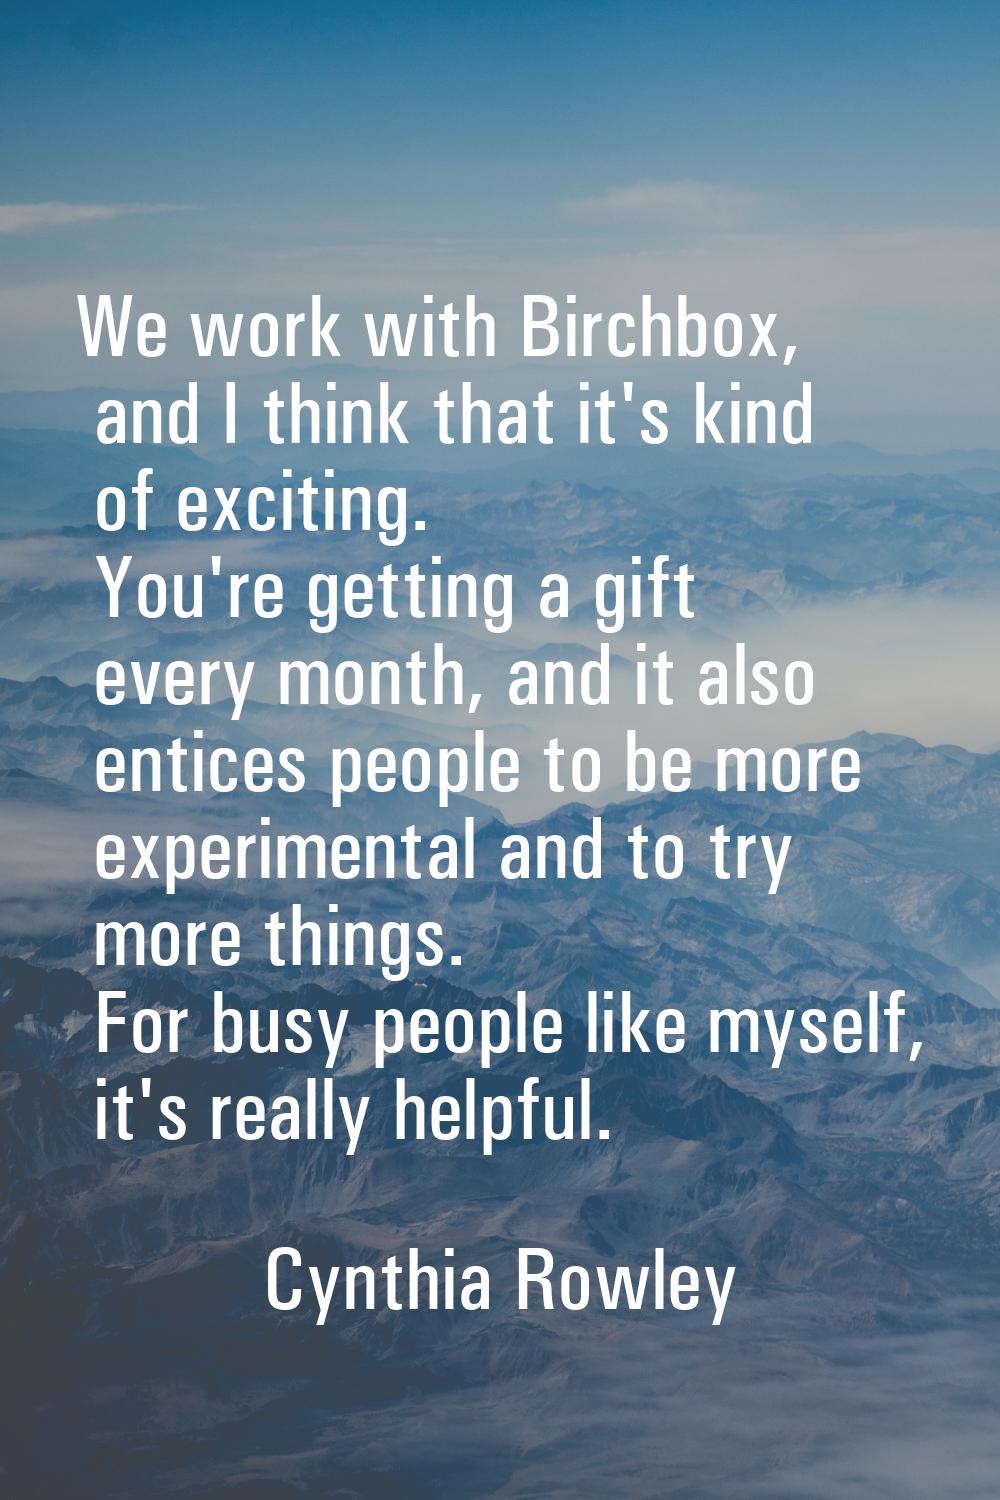 We work with Birchbox, and I think that it's kind of exciting. You're getting a gift every month, a